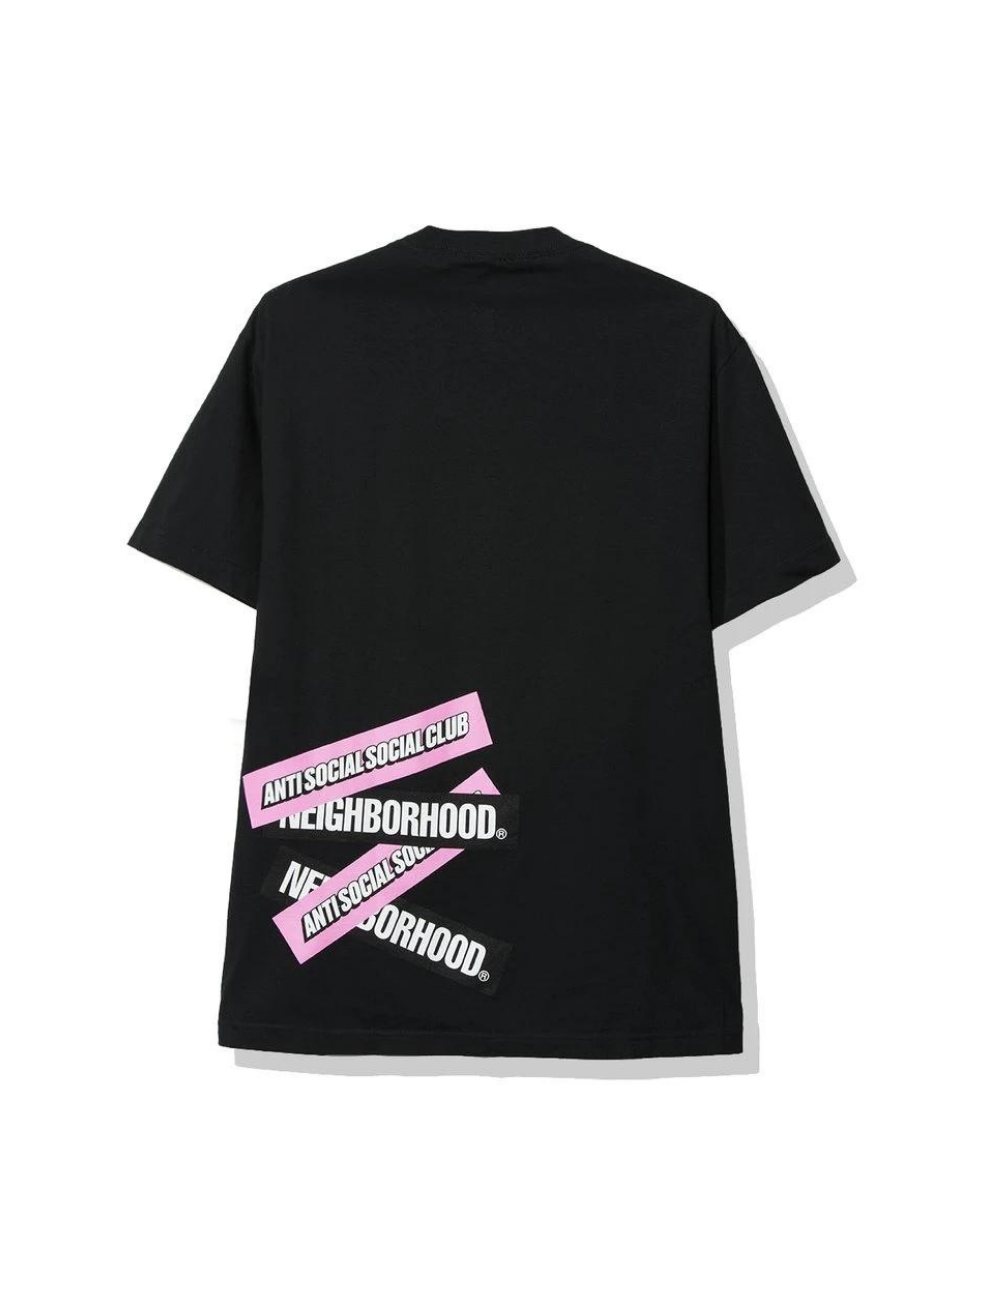 Anti Social Social Club x Neighborhood 'Stuck On You' Tee (Black) - Shop Streetwear, Sneakers, Slippers and Gifts online | Malaysia - The Factory KL